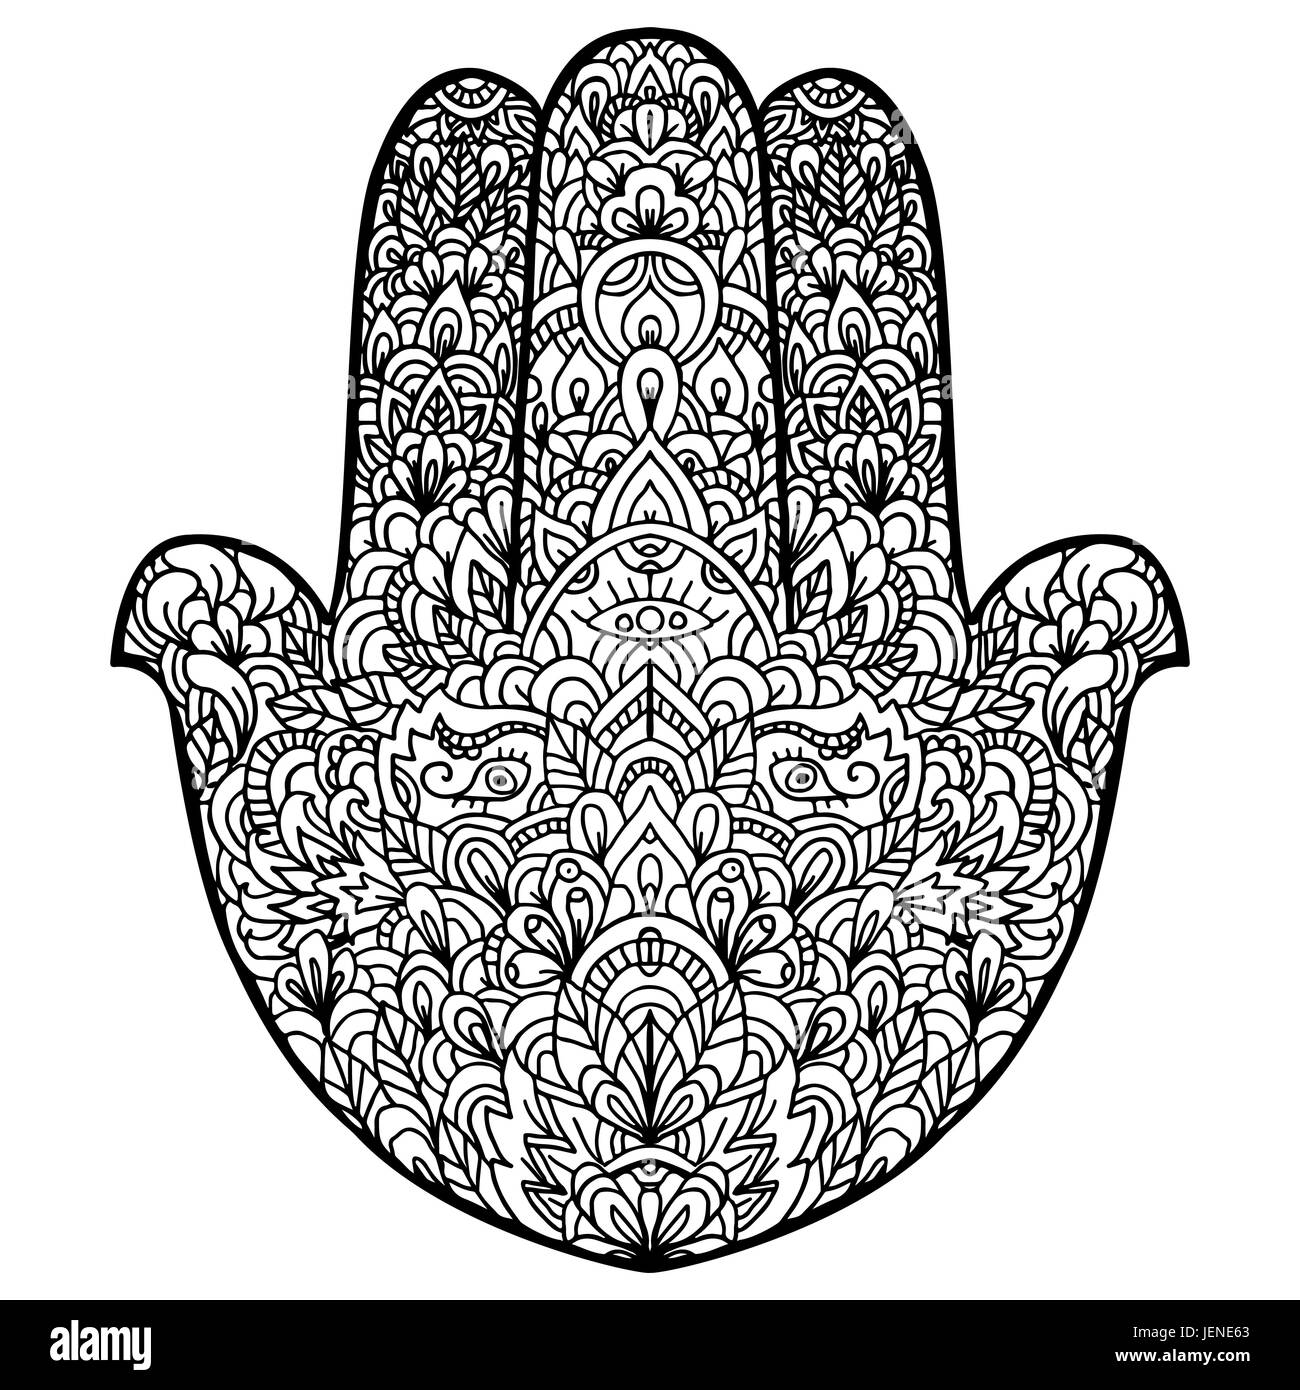 Hamsa hand drawn symbol. Fatimas hand pattern. Vector illustration. Indian mandala ornament for adult coloring books. Asian pattern. Black and white authentic background. Stock Vector